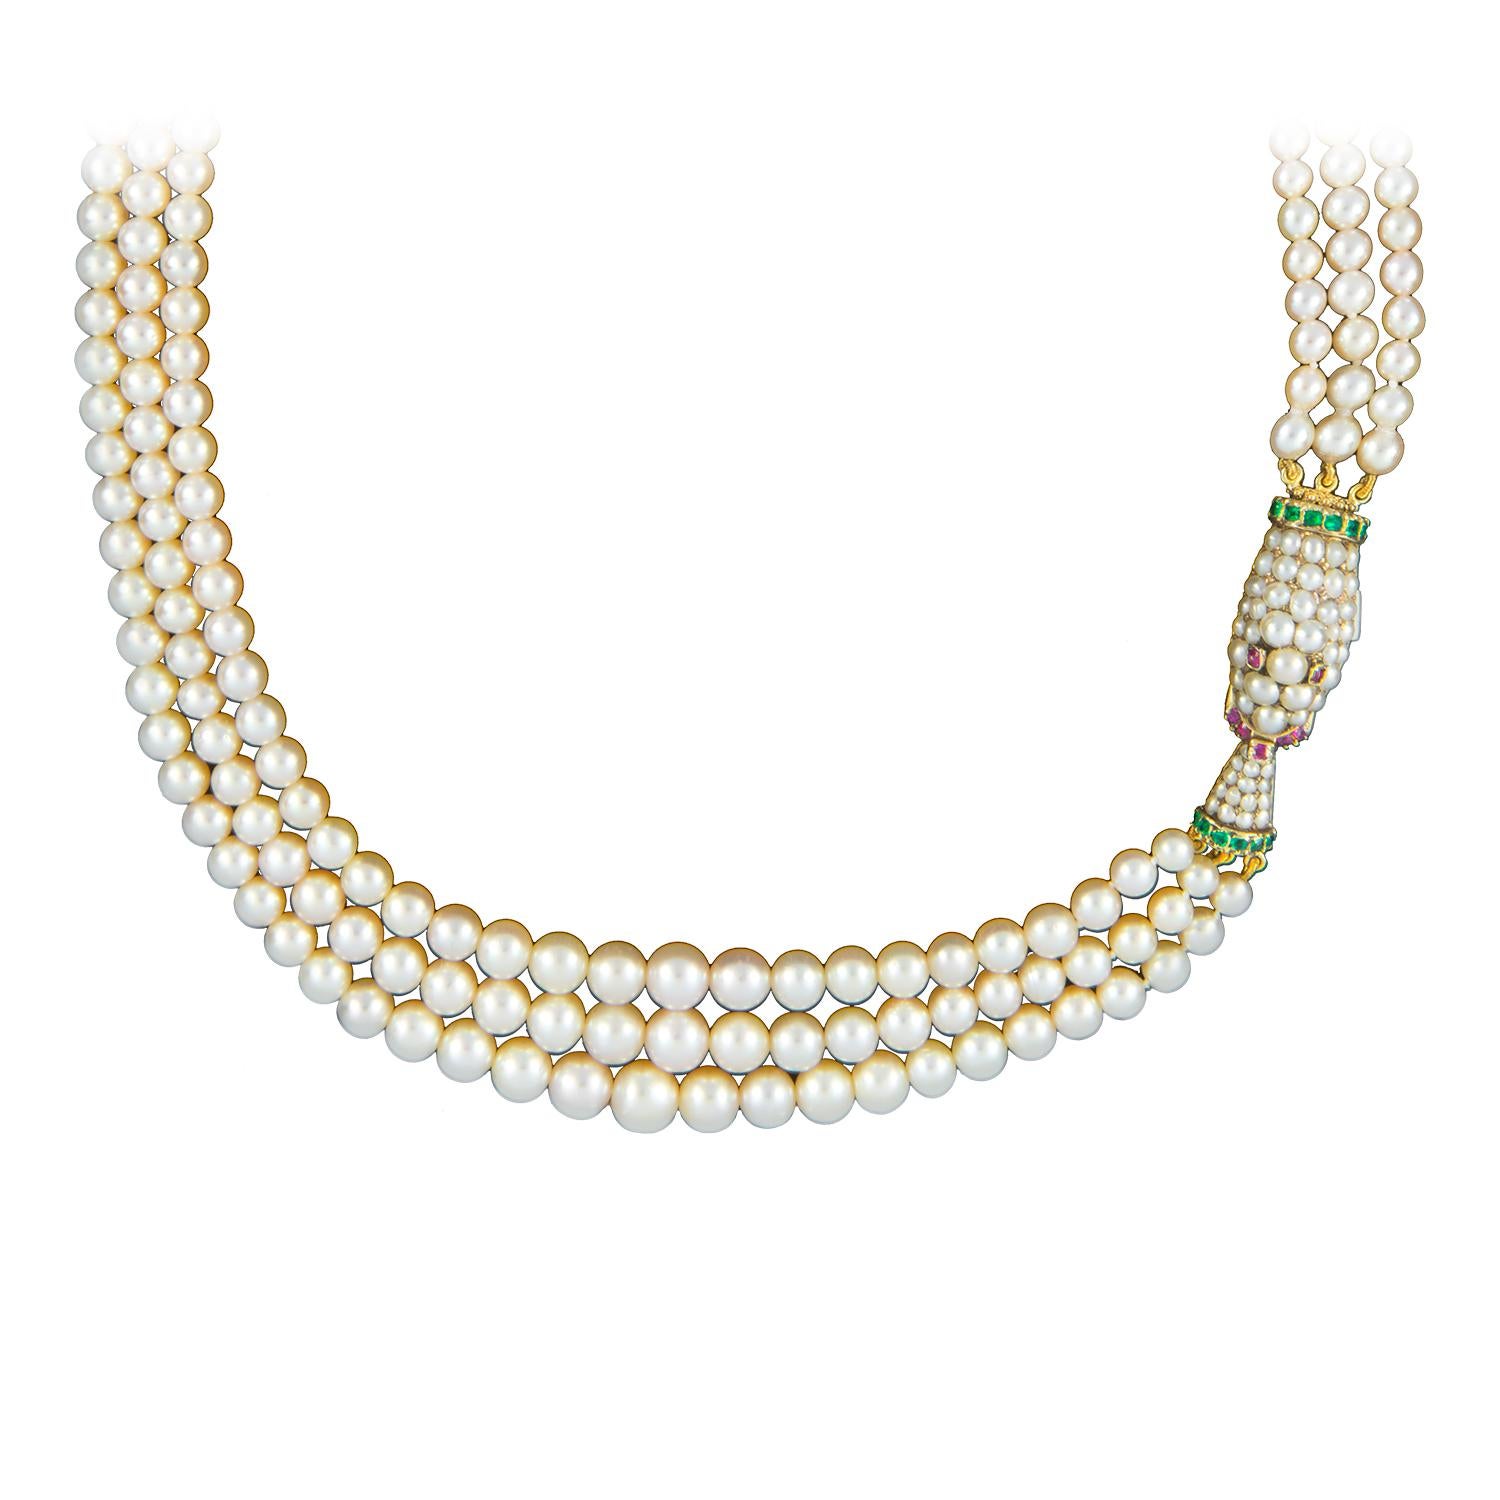 A Fine Victorian three-row natural pearl necklace, the 268 natural saltwater pearls accompanied by GCS Report 5777-8663, graduating from the centre with diameters from 3.0 to 6.9mm, strung to three graduating rows, to a snake head and tail clasp